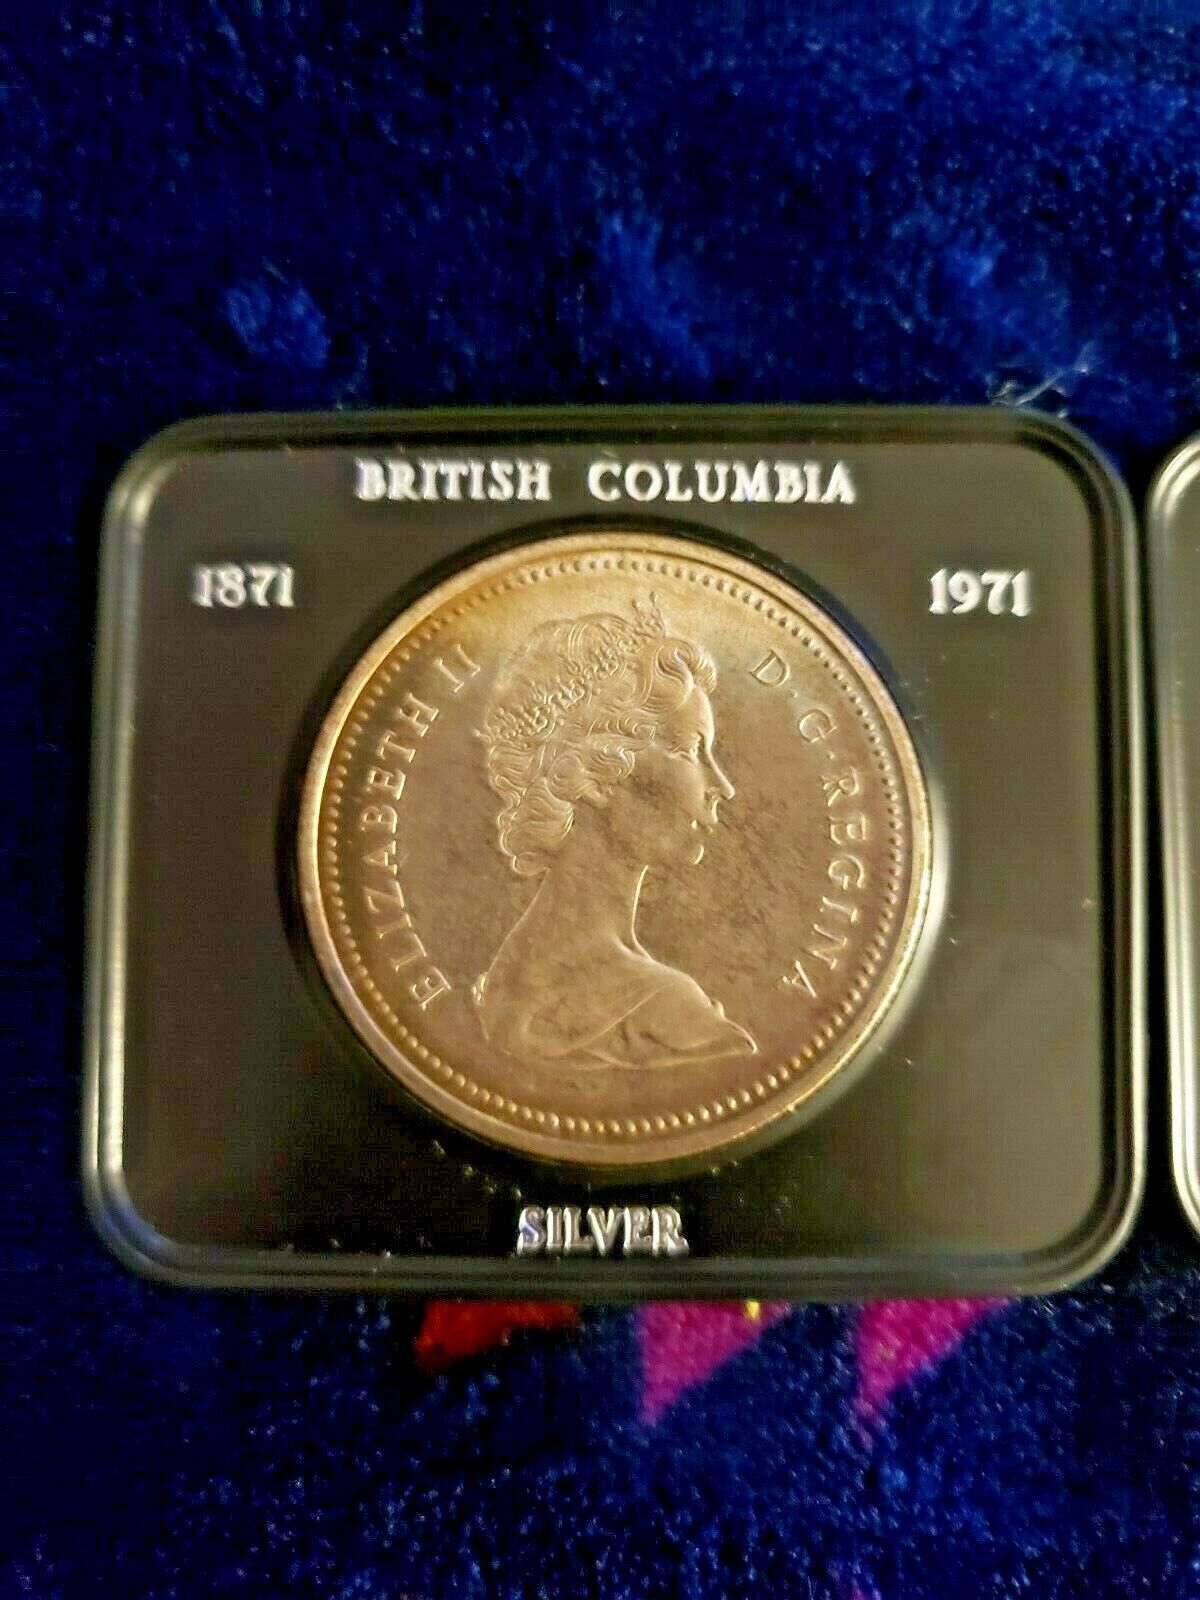 1871-1971 British Columbia Silver $1 Dollar RARE (Only 2 left to purchase)